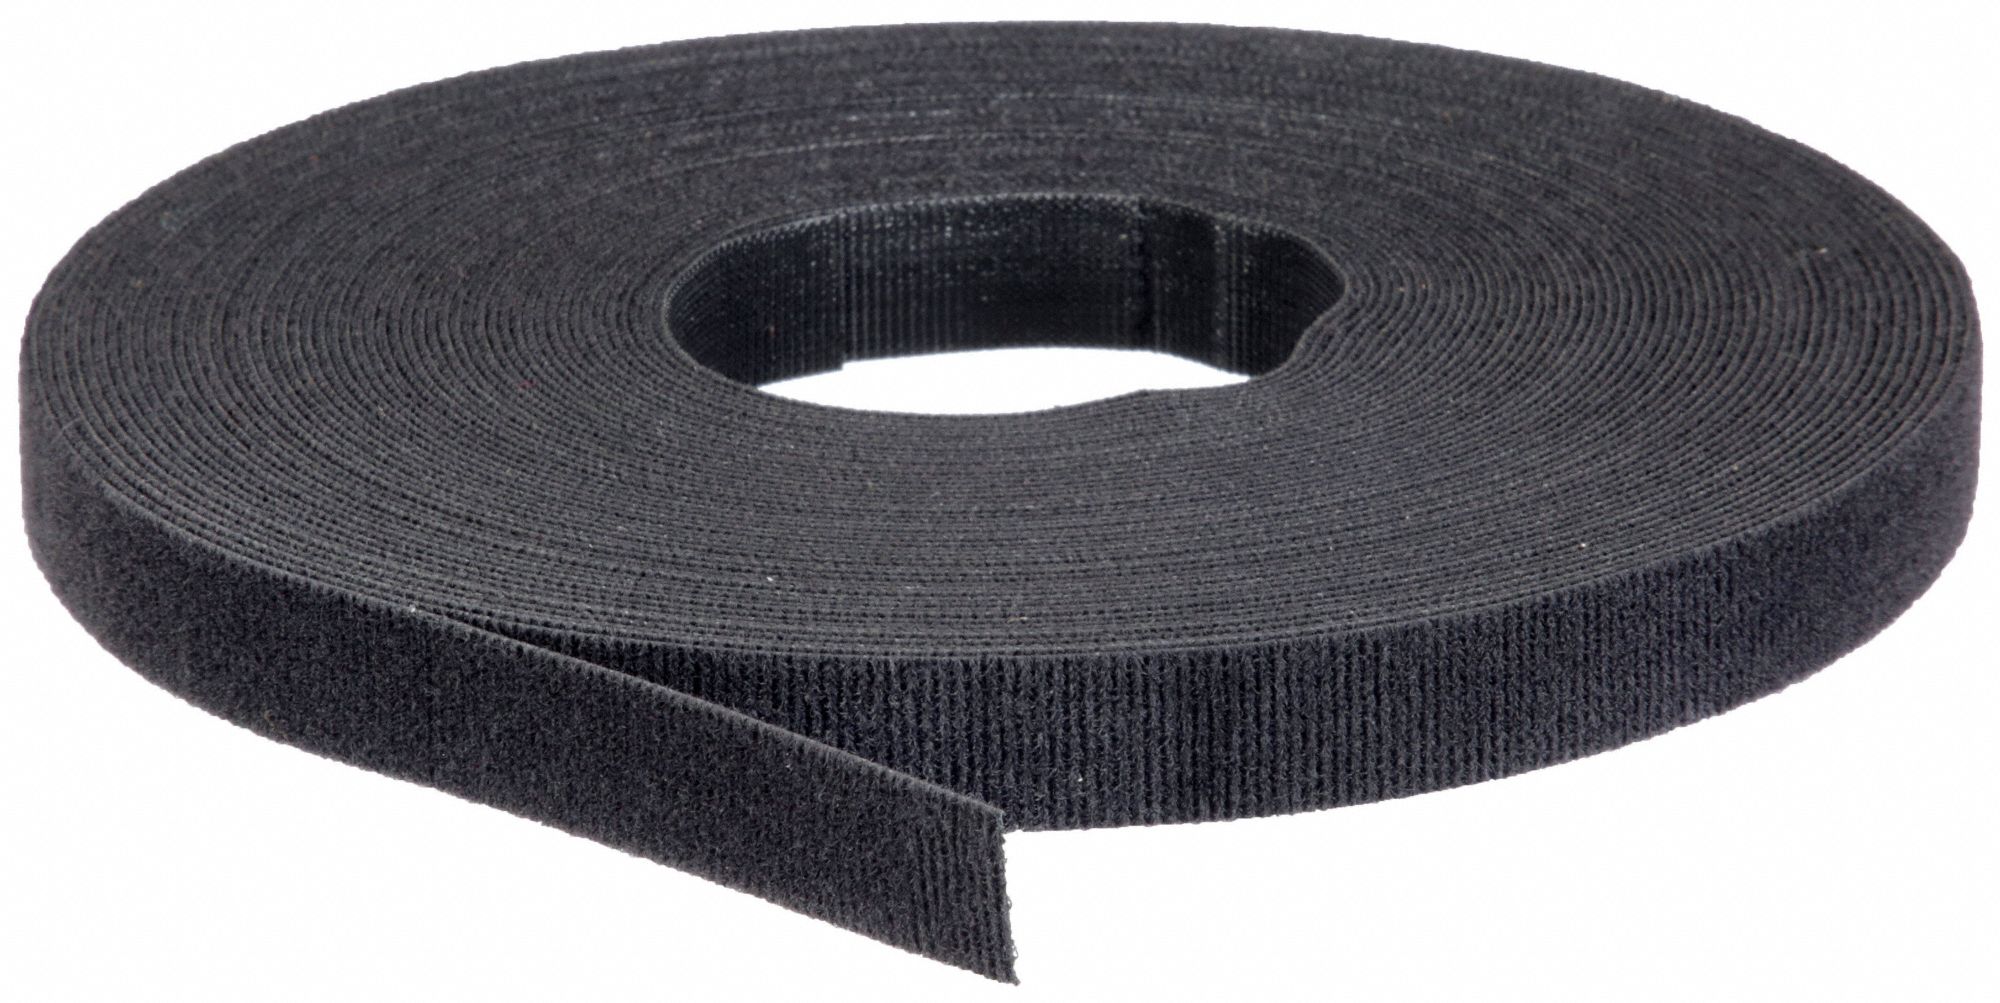 Perforated Hook and Loop (Velcro)